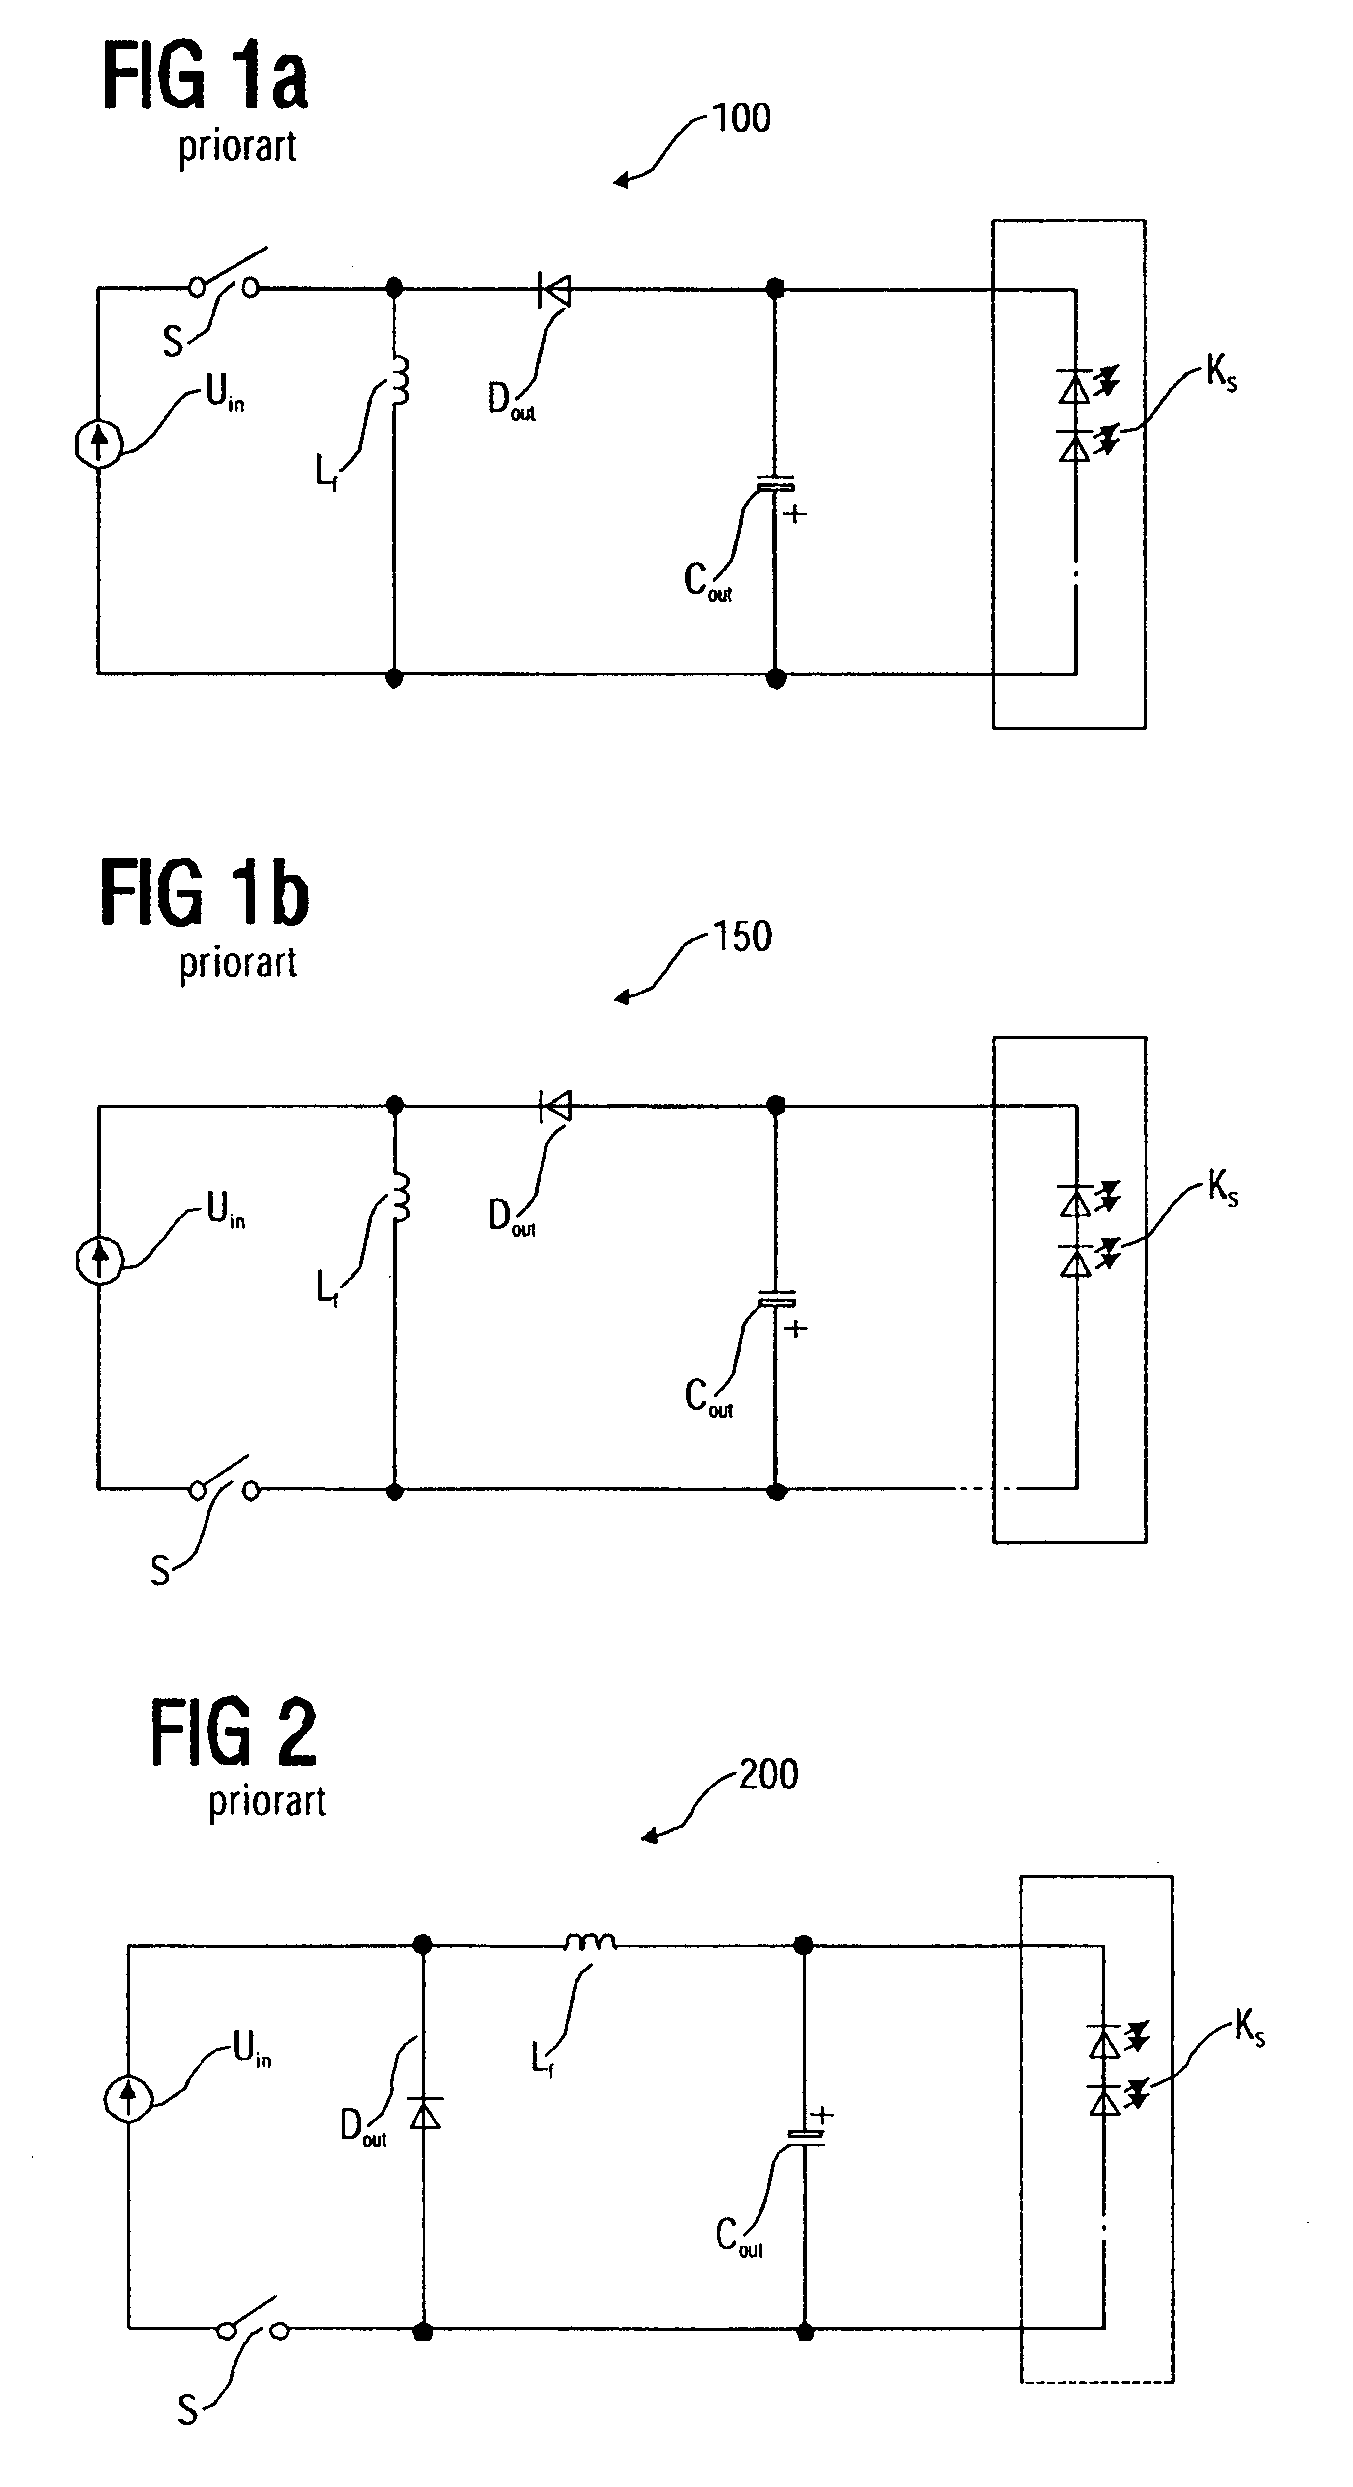 Circuitry for supplying a load with an output current